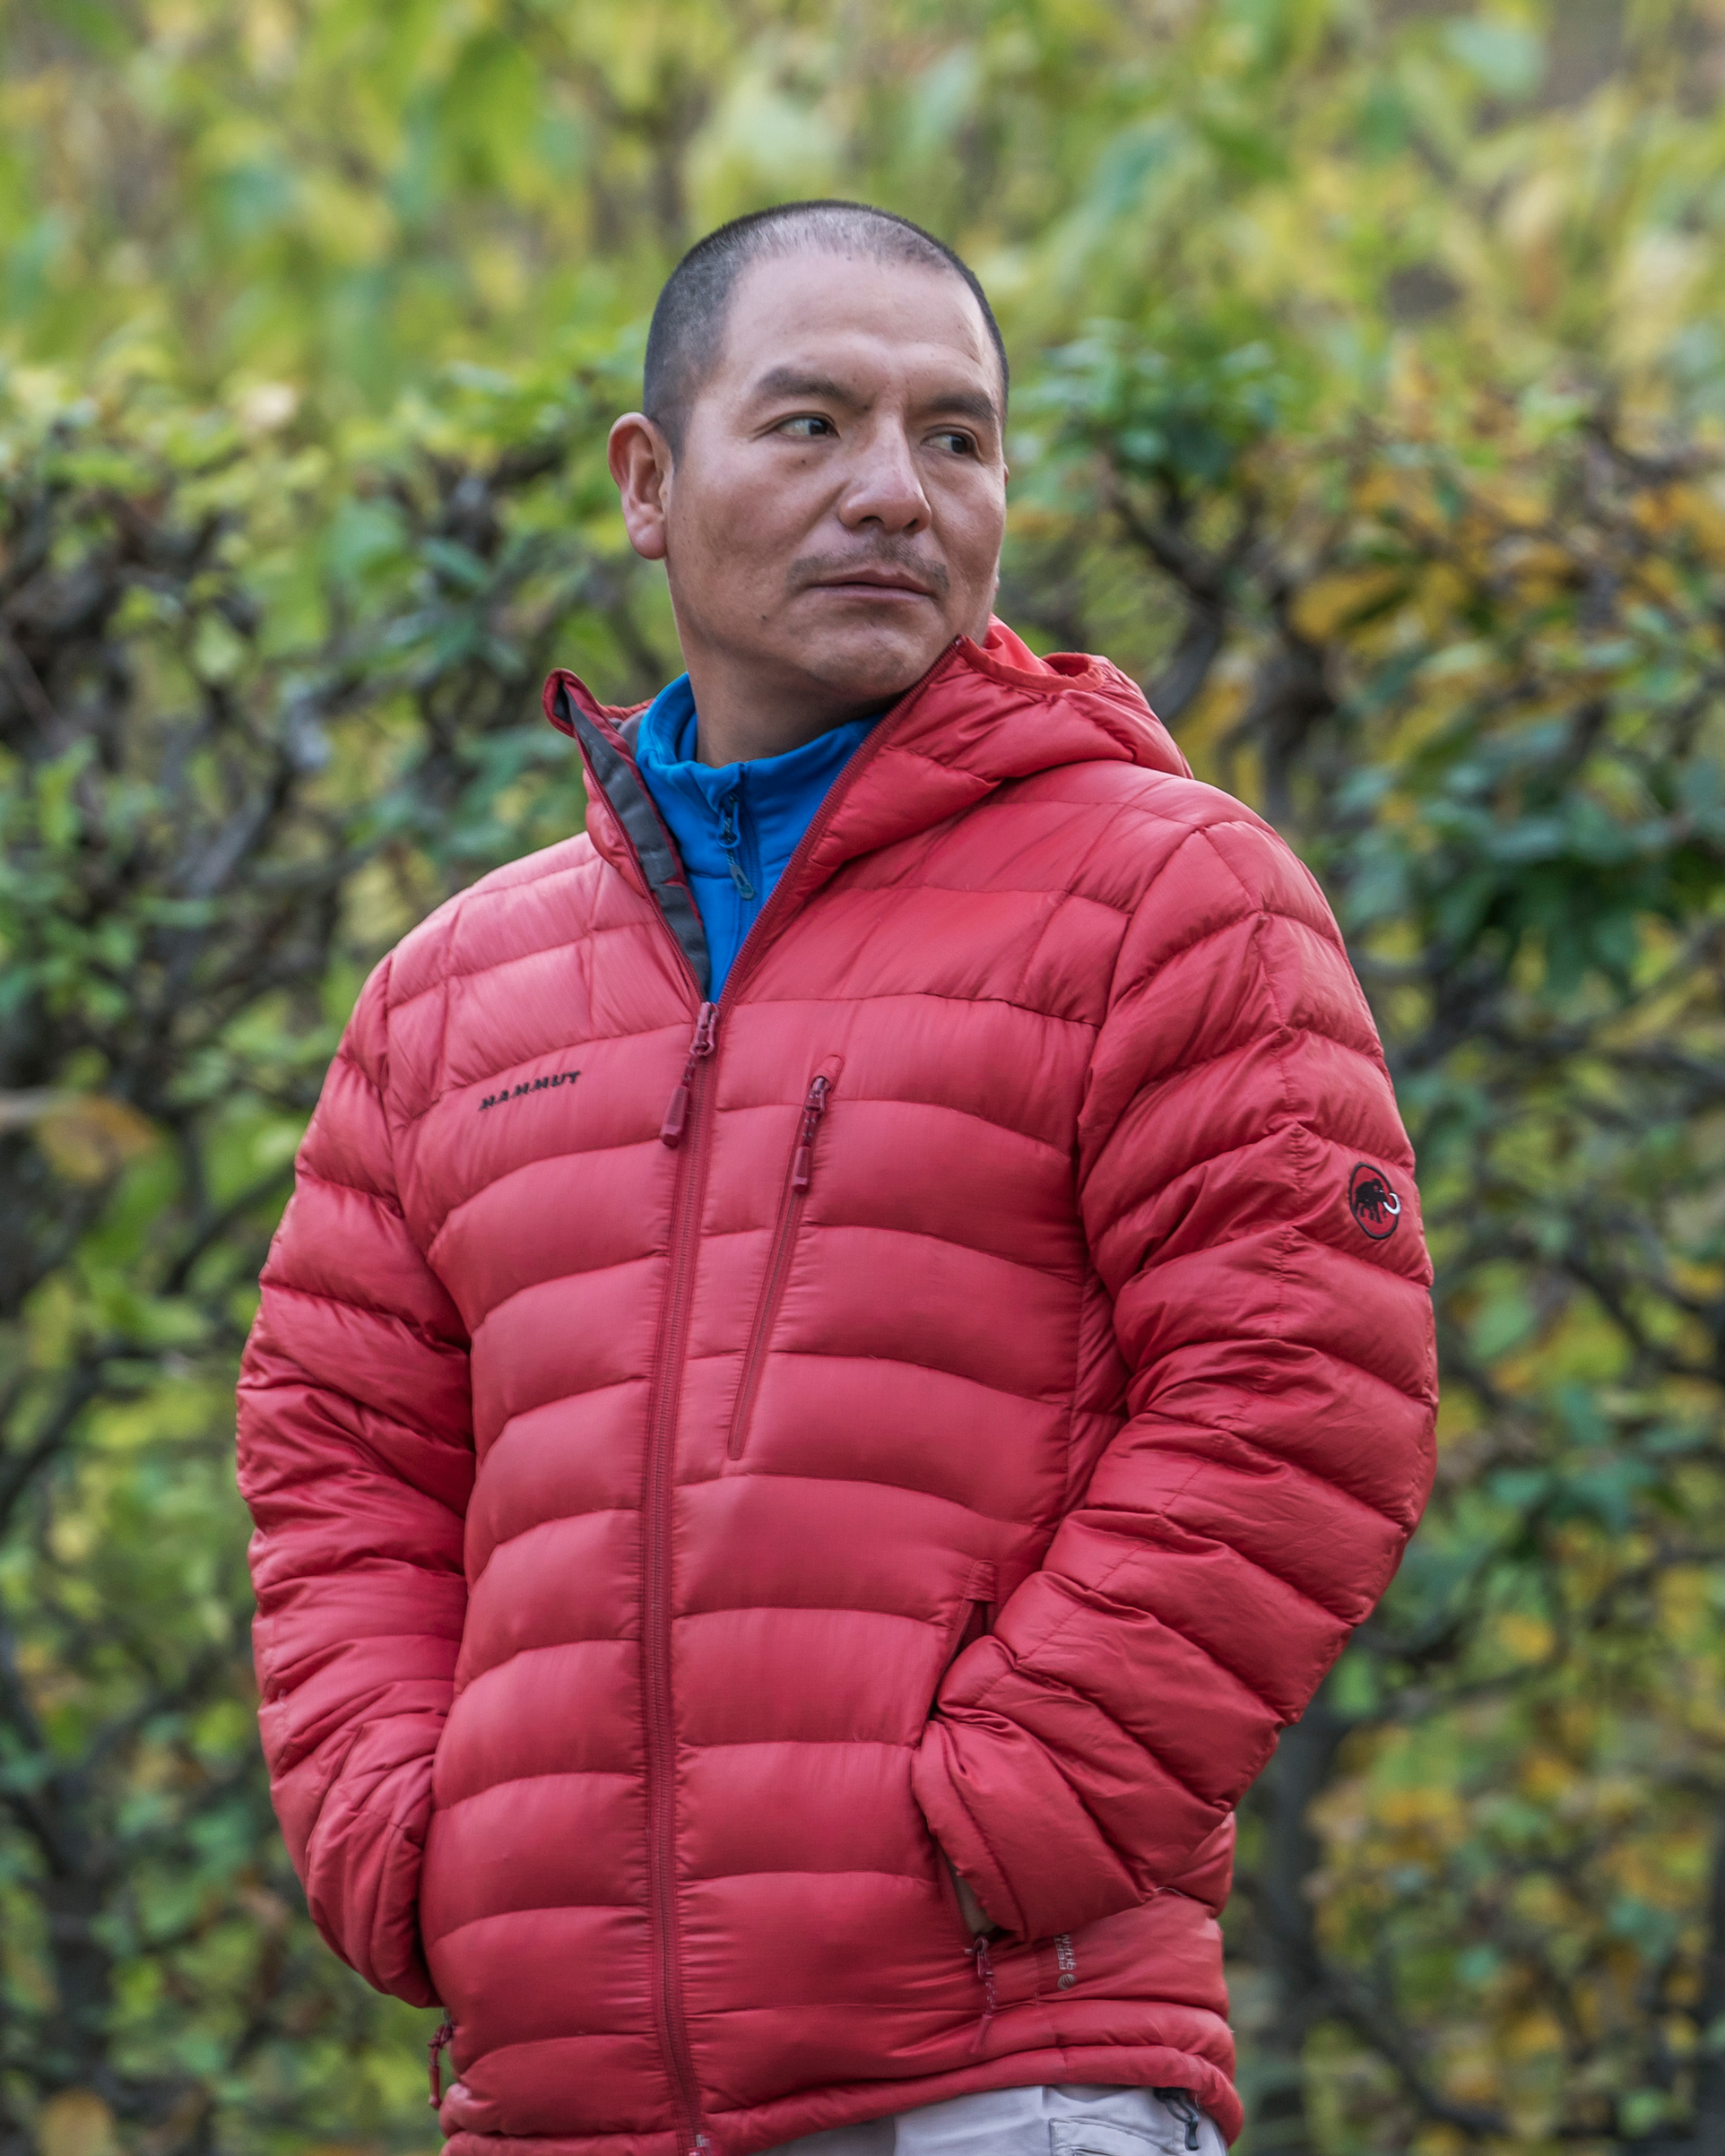 Saul Luciano Lliuya, a farmer from Peru, at the U.N. Climate Change Conference in Bonn, Germany, on Nov. 14, 2017. (Anthony Kwan—Getty Images)